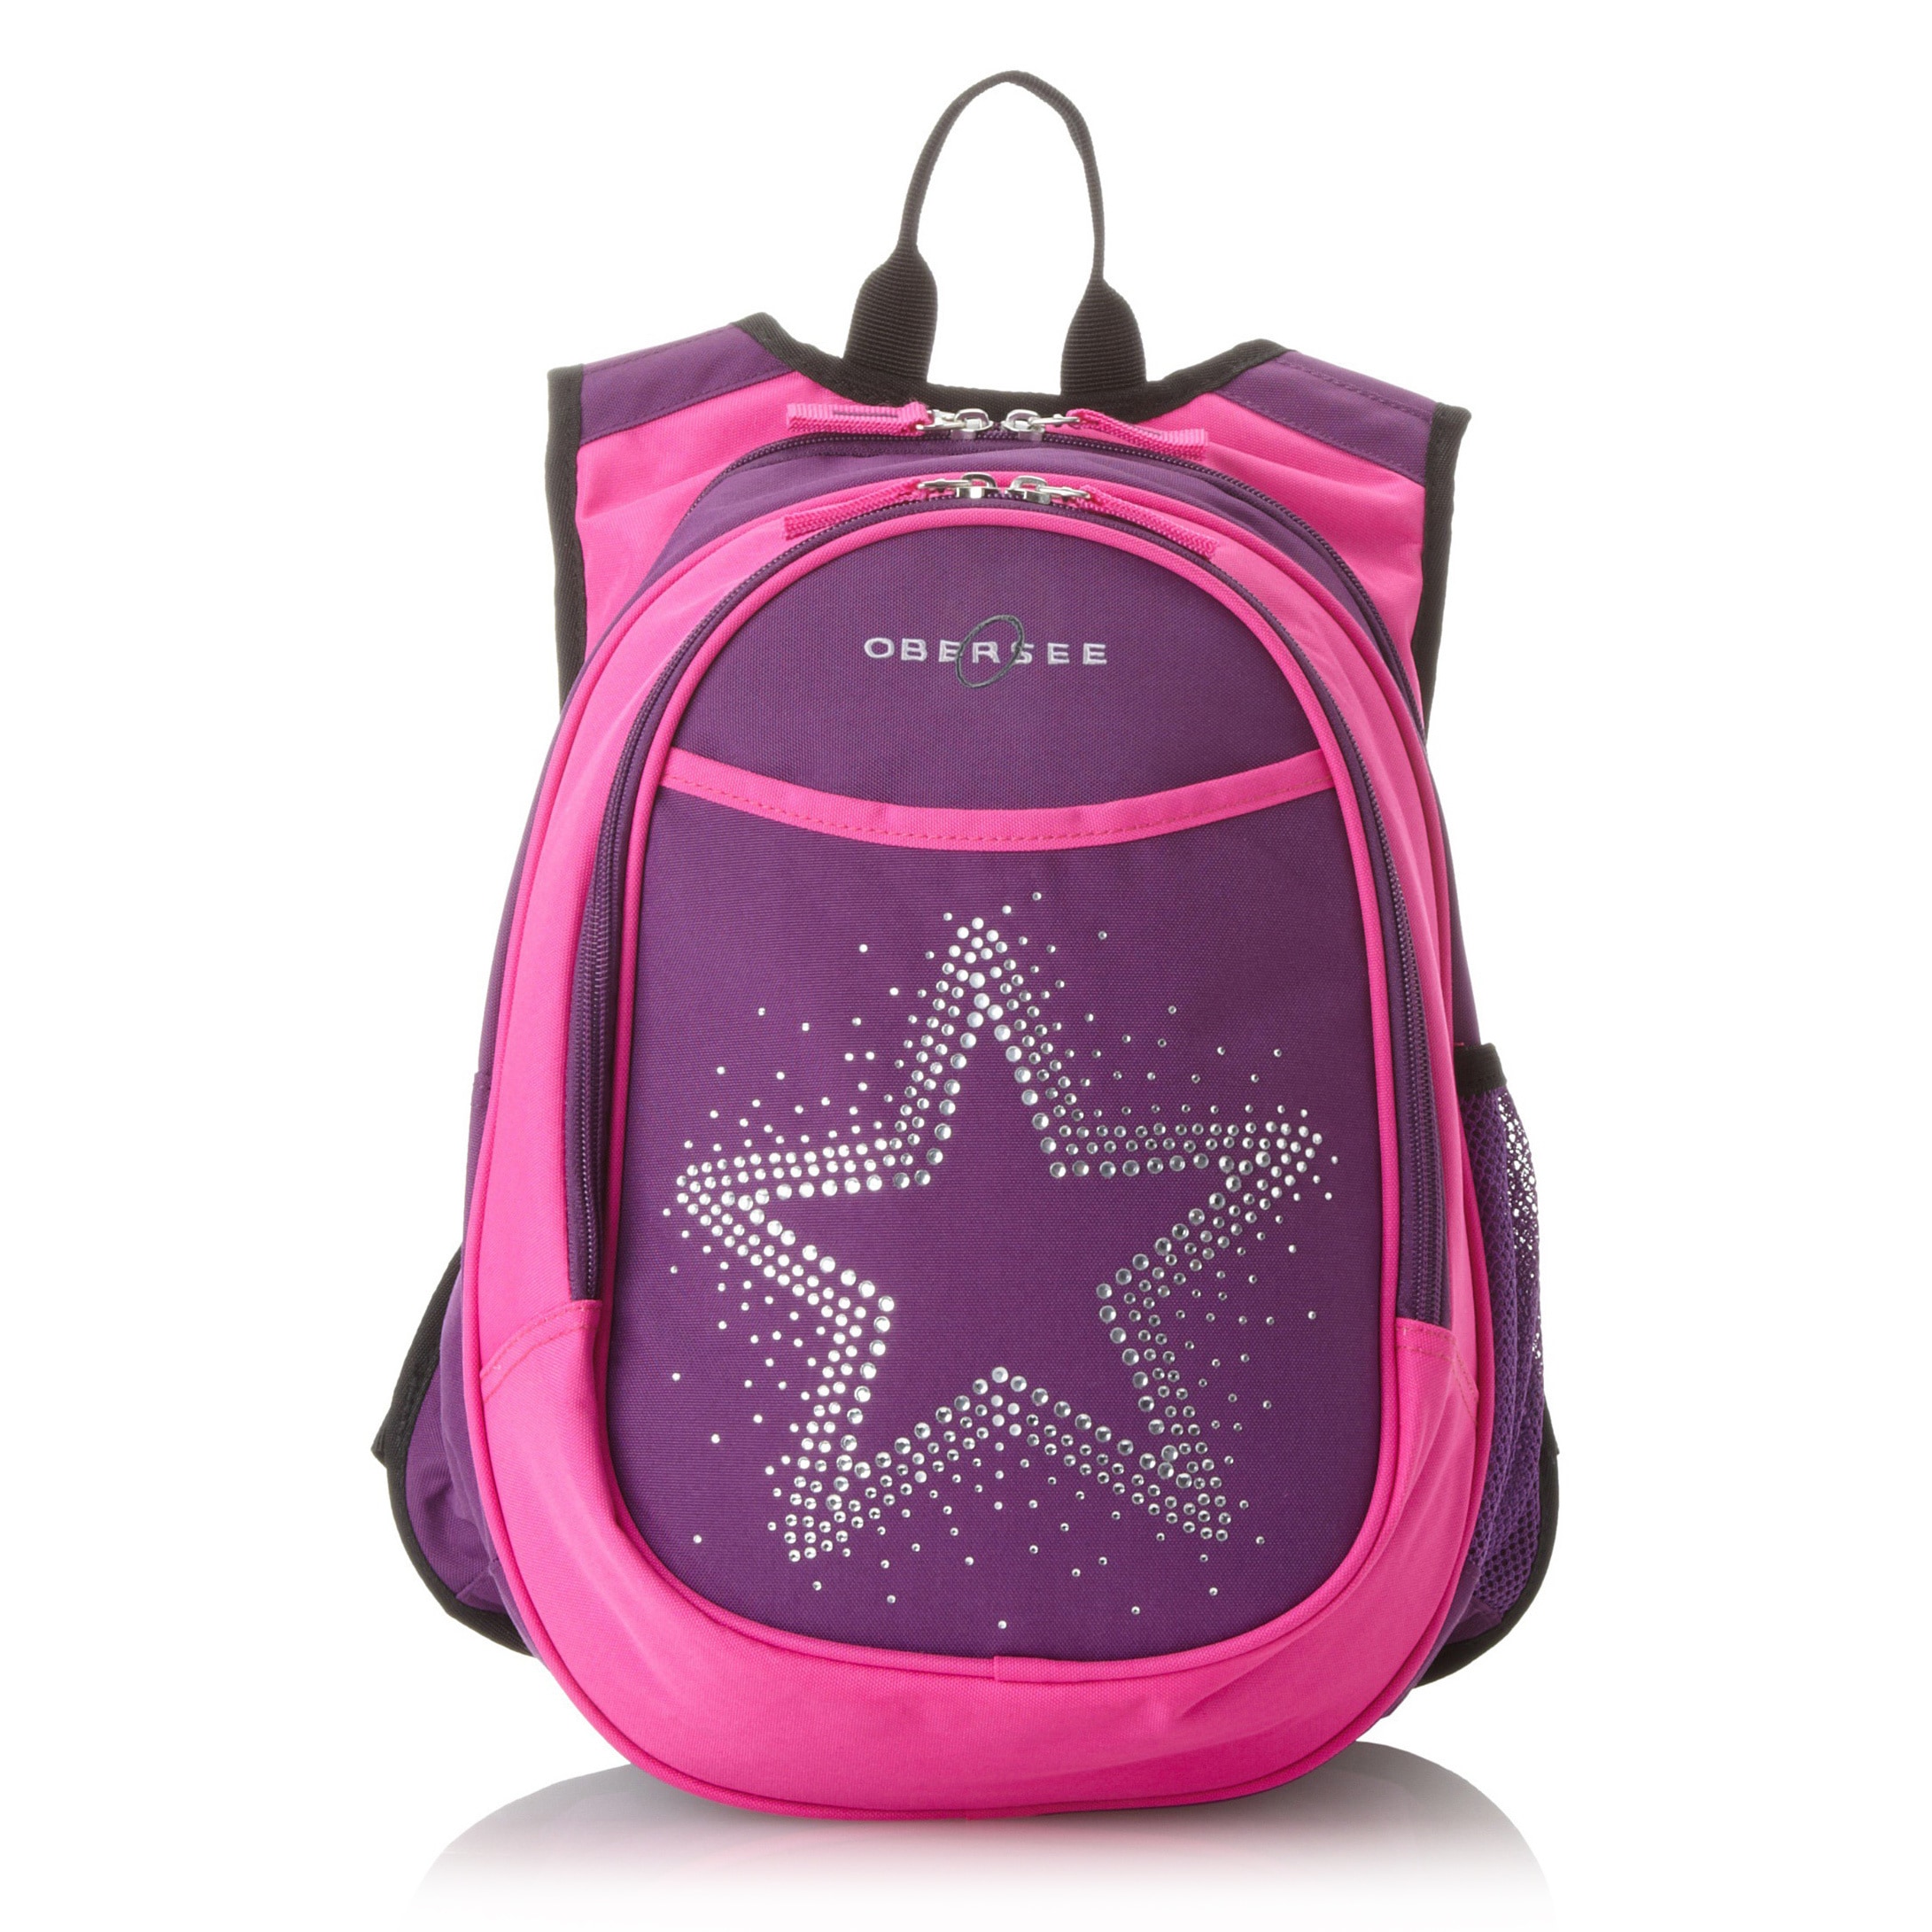 Obersee Kids Pre school All in one Bling Rhinestone Star Backpack With Cooler